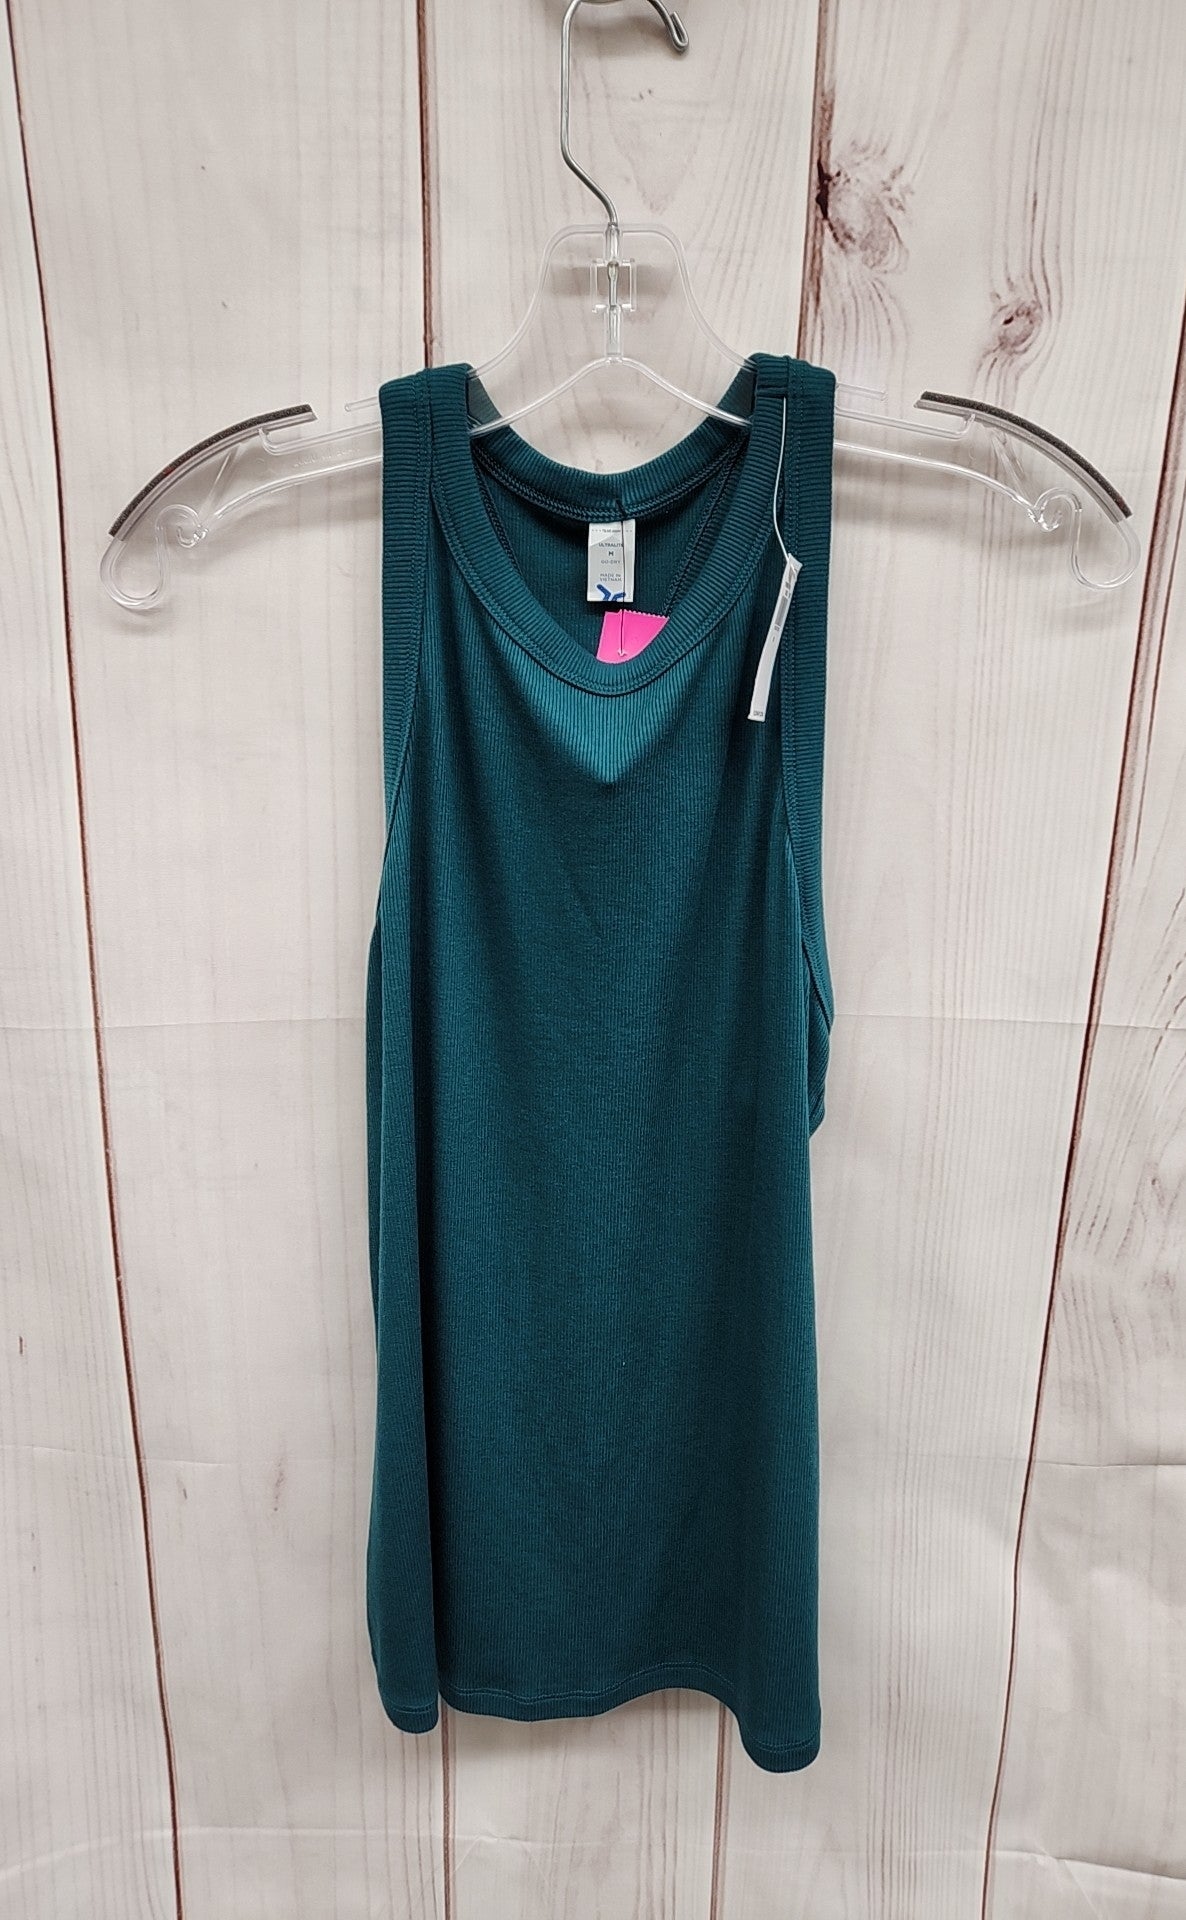 Old Navy Women's Size M Green Sleeveless Top